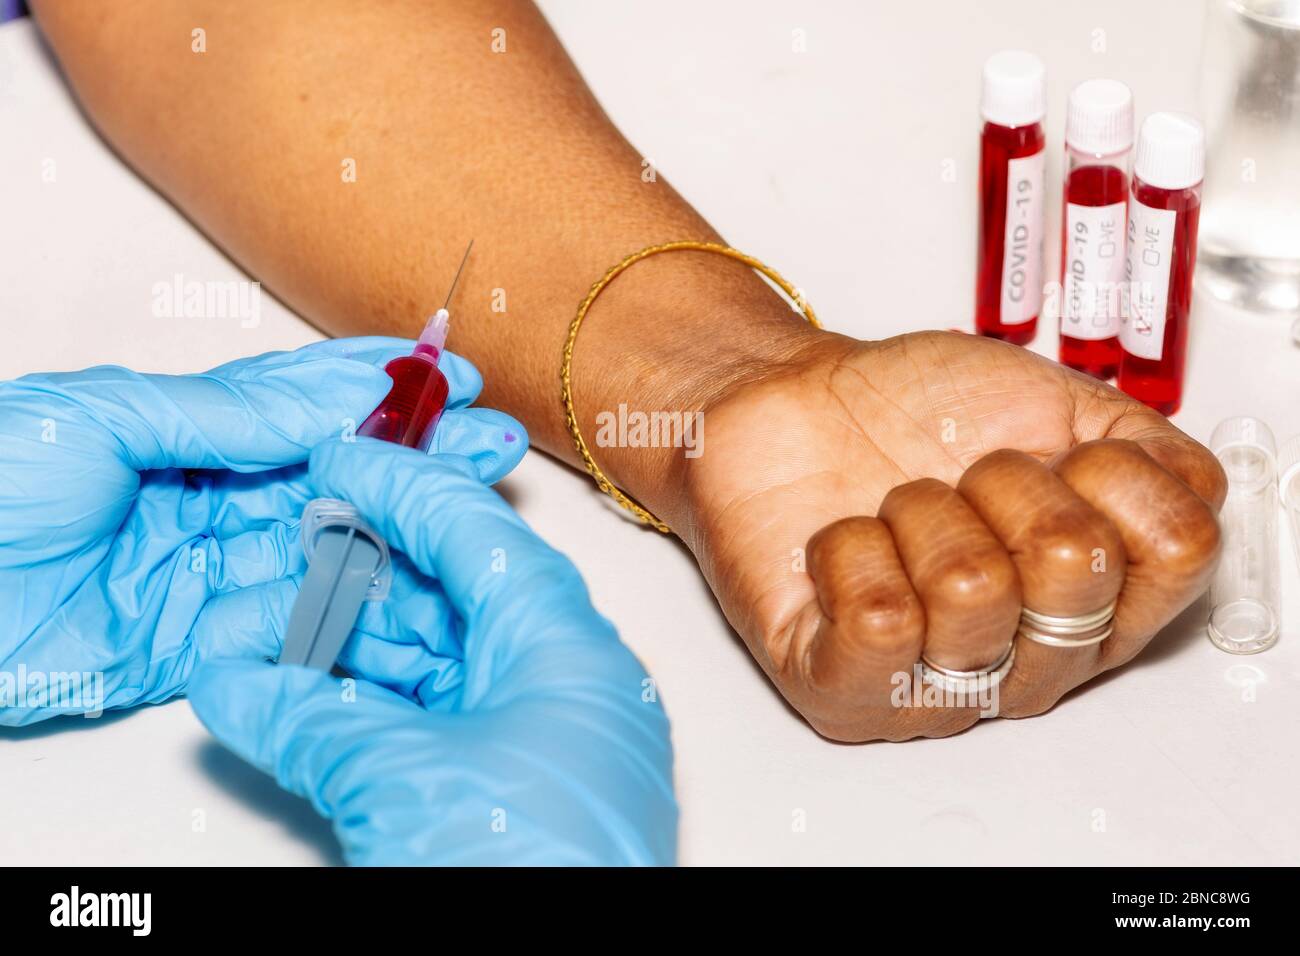 Hands of a medical worker holding an injection syringe with blood sample taken from an Indian woman patient for coronavirus test Stock Photo